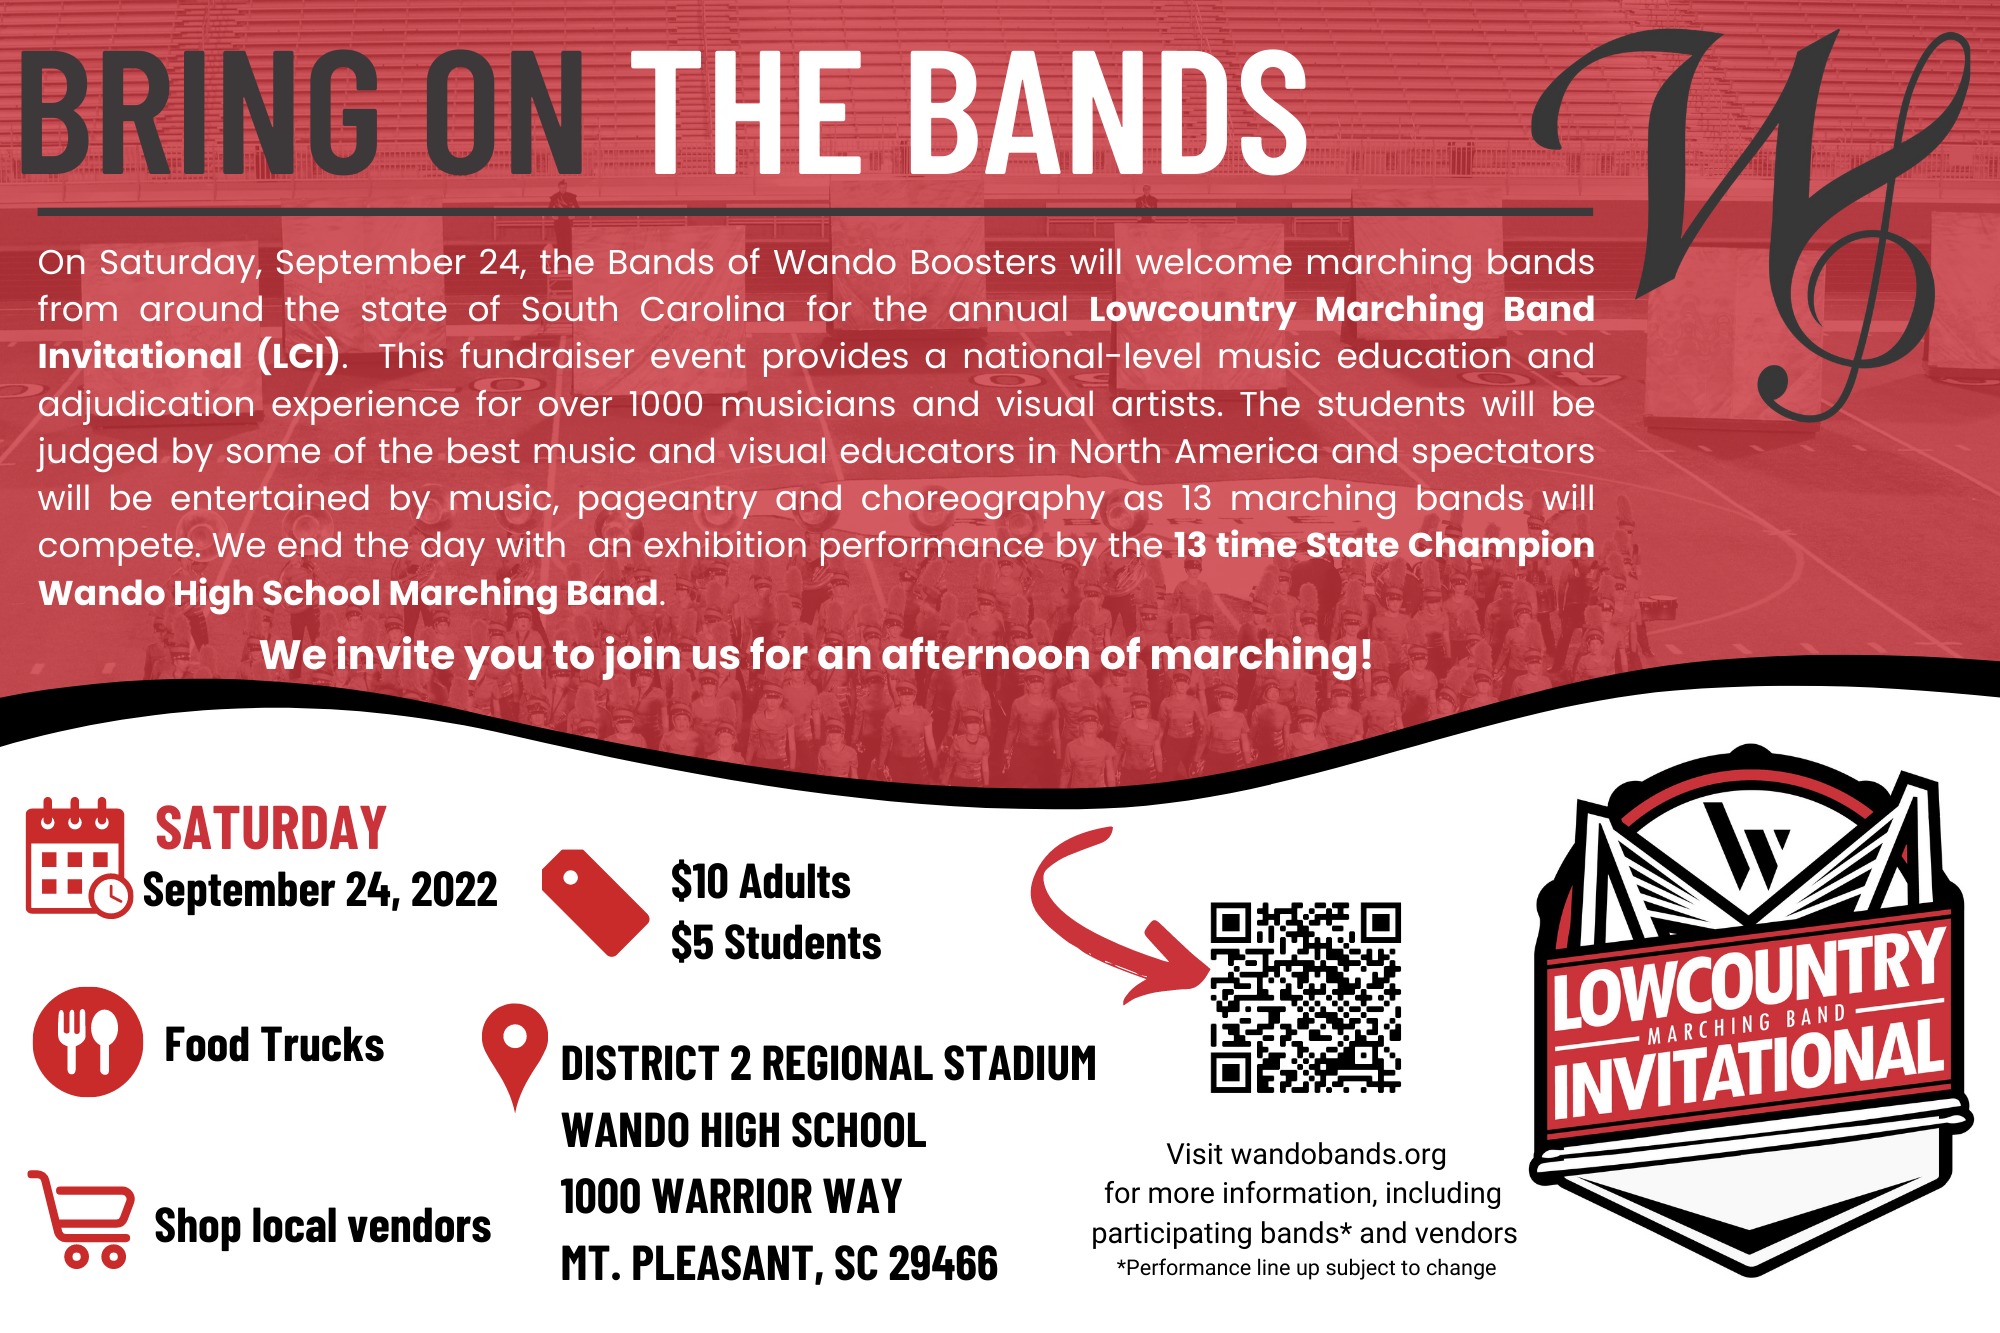 2022 Lowcountry Invitational Marching Band Festival 'Bring on the Bands' info graphic from The Bands of Wando Foundation